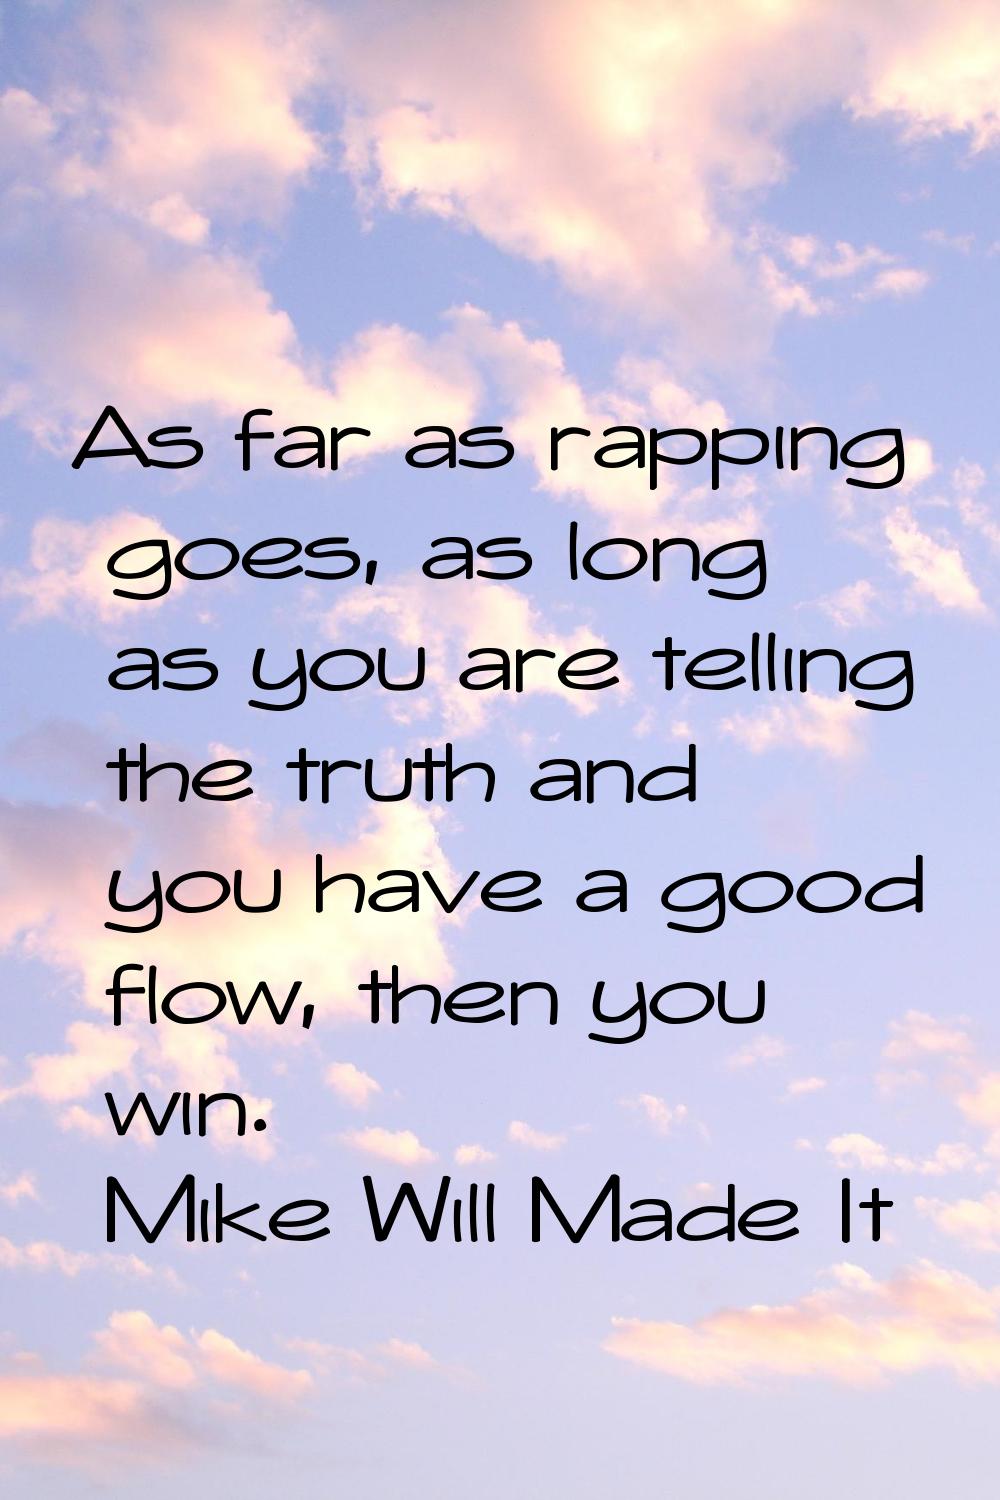 As far as rapping goes, as long as you are telling the truth and you have a good flow, then you win